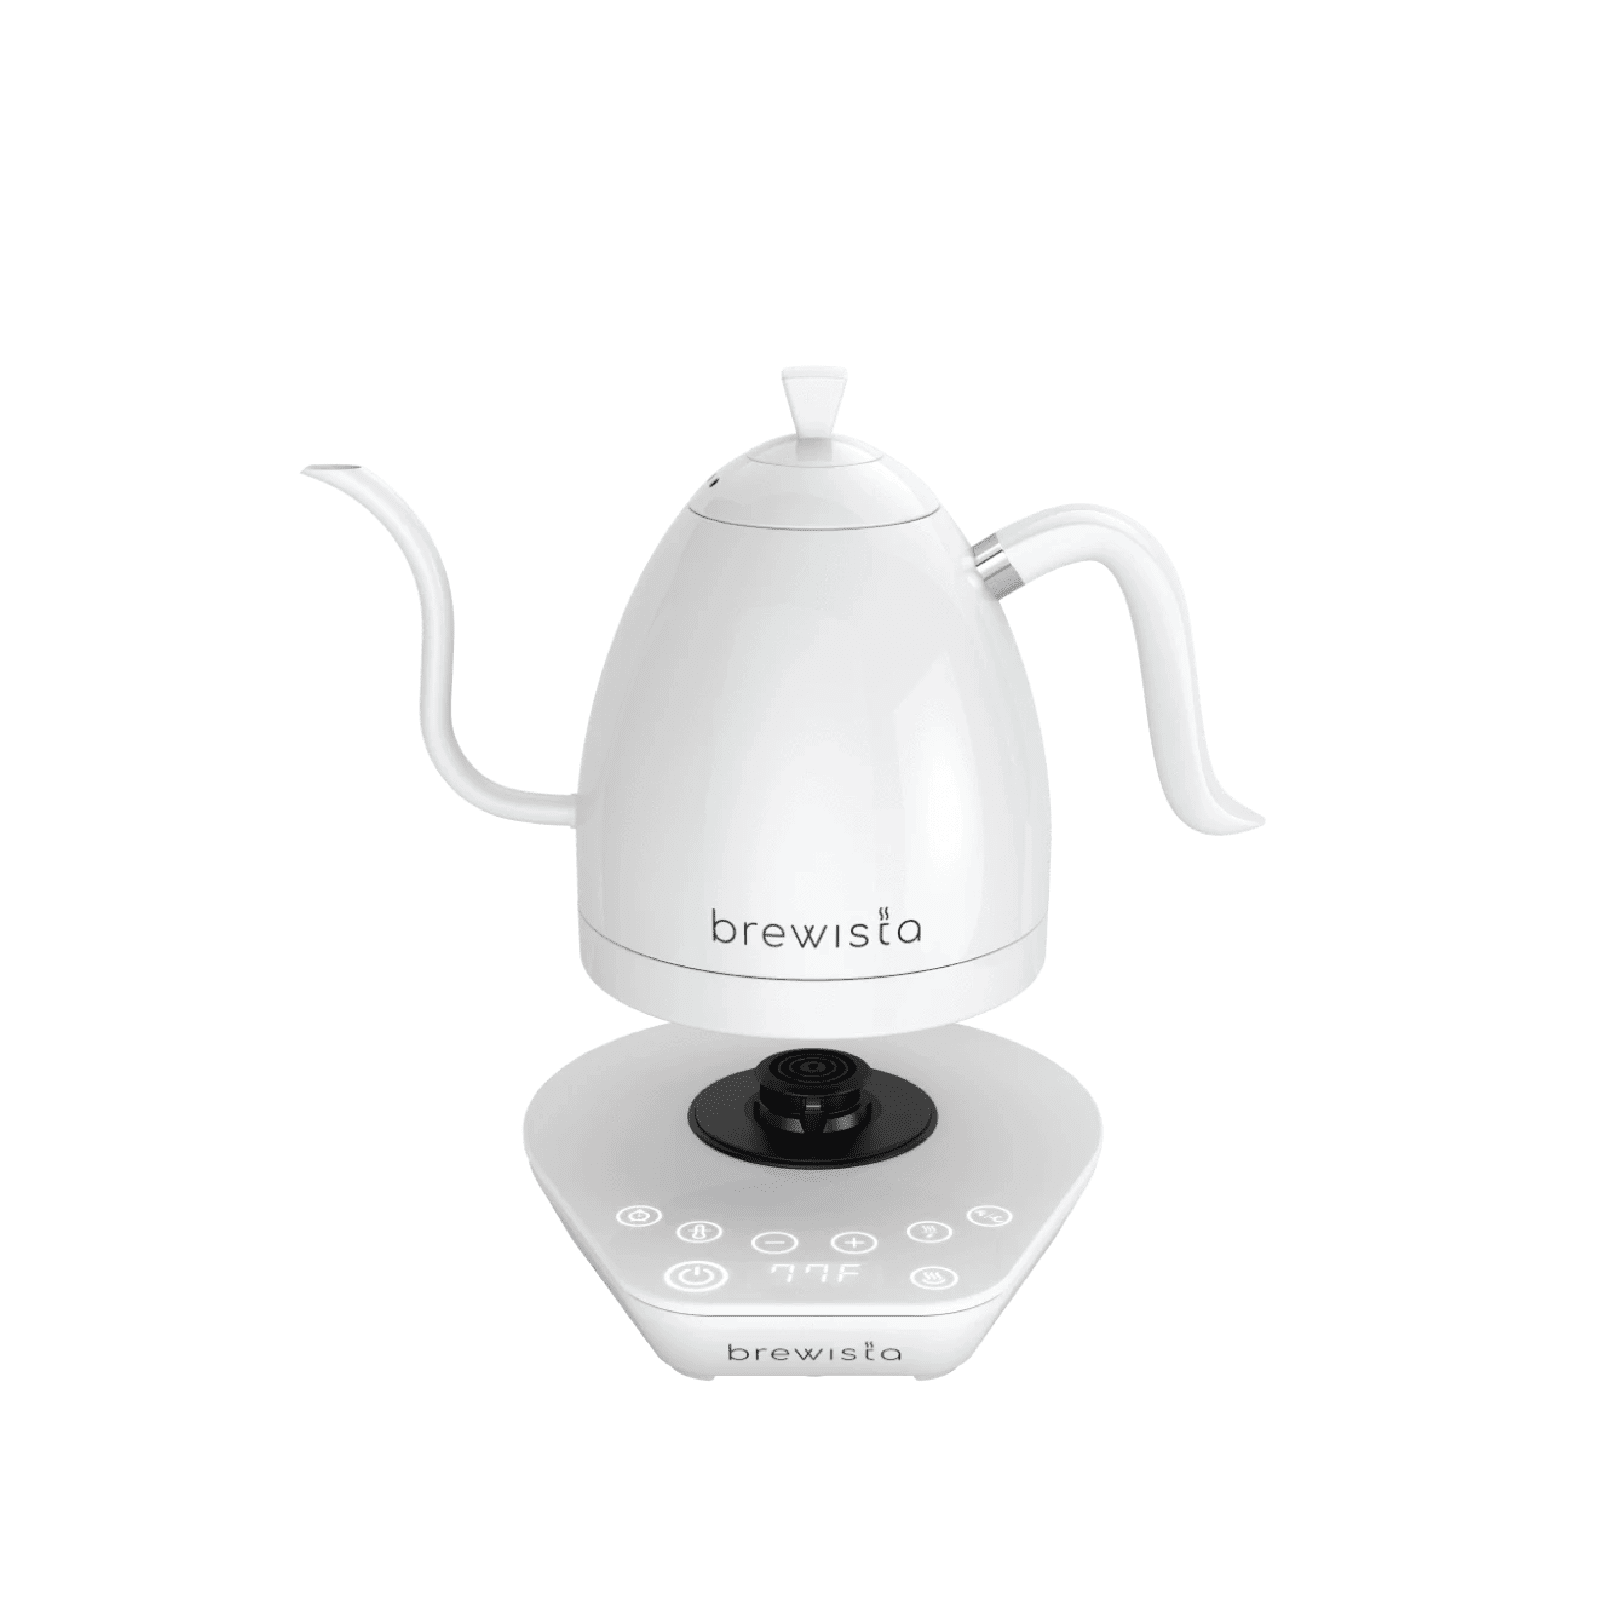 https://cdn.shopify.com/s/files/1/0384/1746/5388/products/brewista-electric-gooseneck-kettle-1-0l-white-30052887560236.png?v=1686464224&width=1600